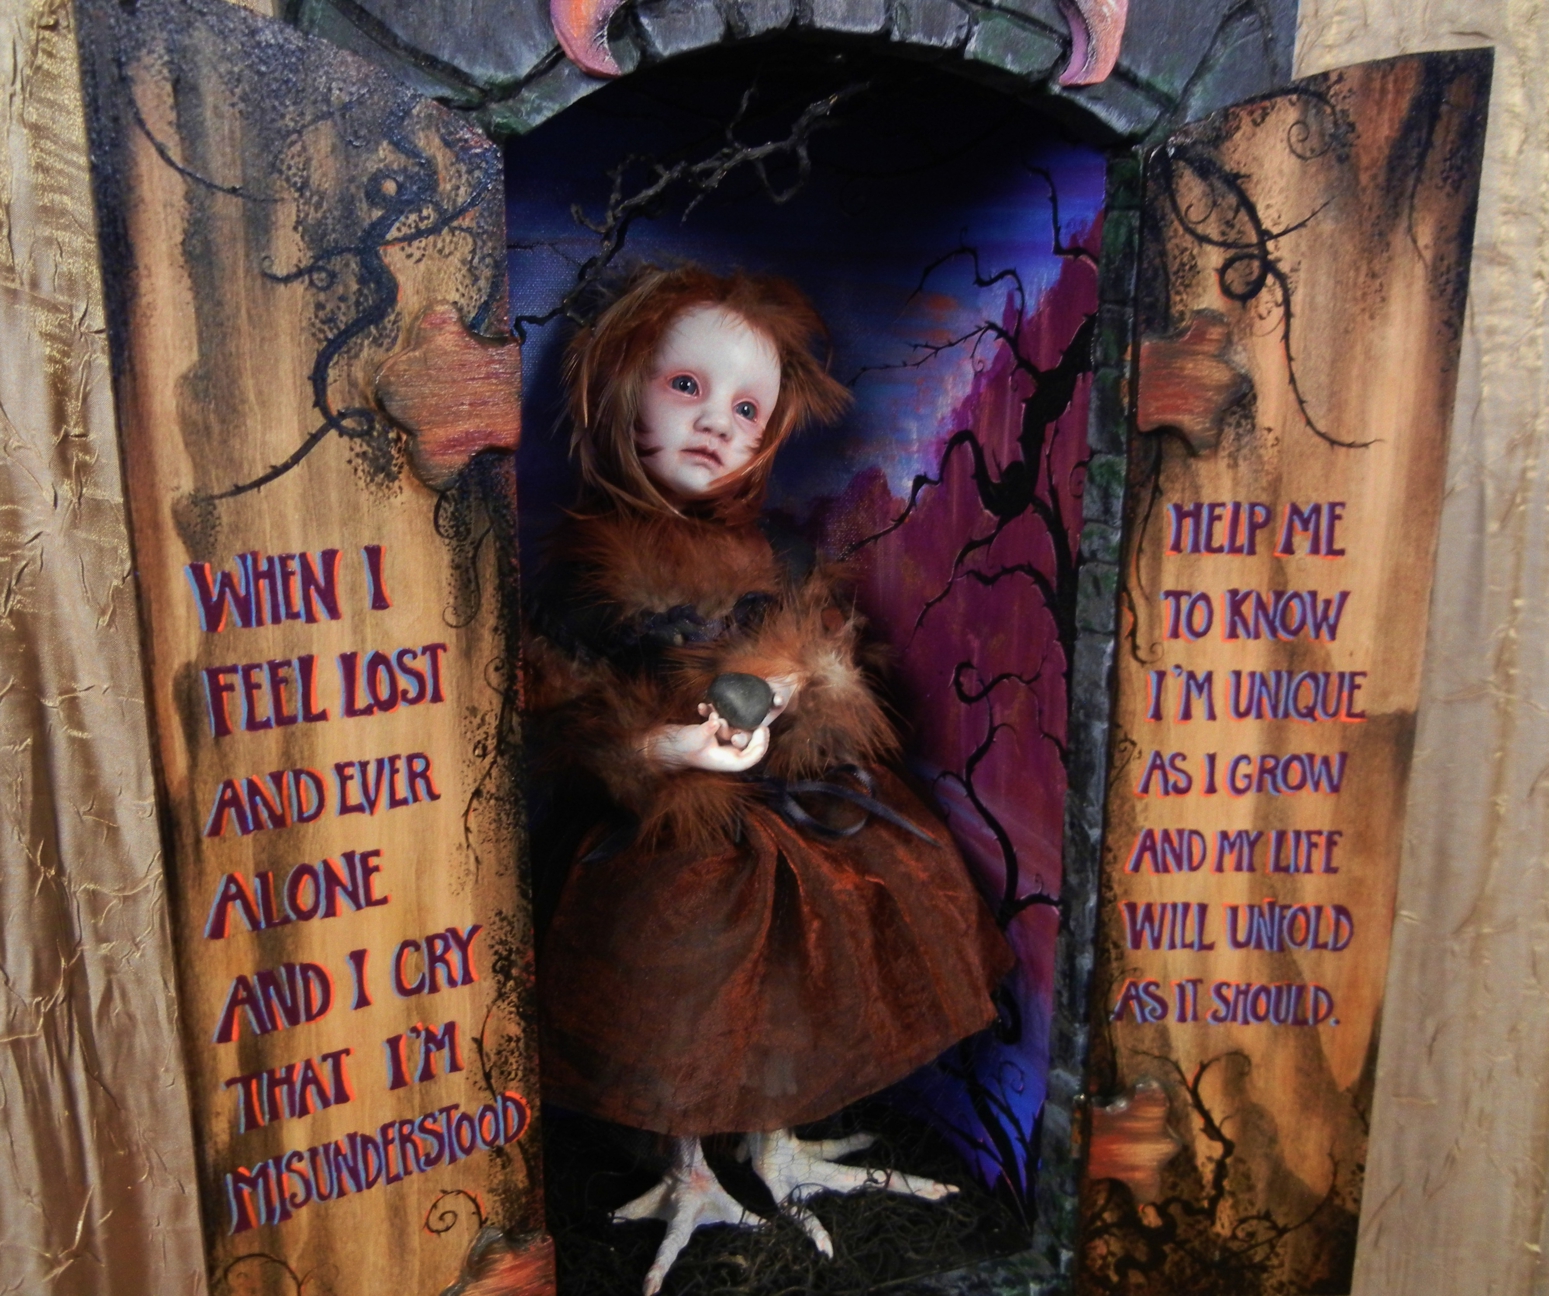 open mixed media cabinet reveals taxidermy artdoll assemblage wild doll with bird feet painted poetry on doors